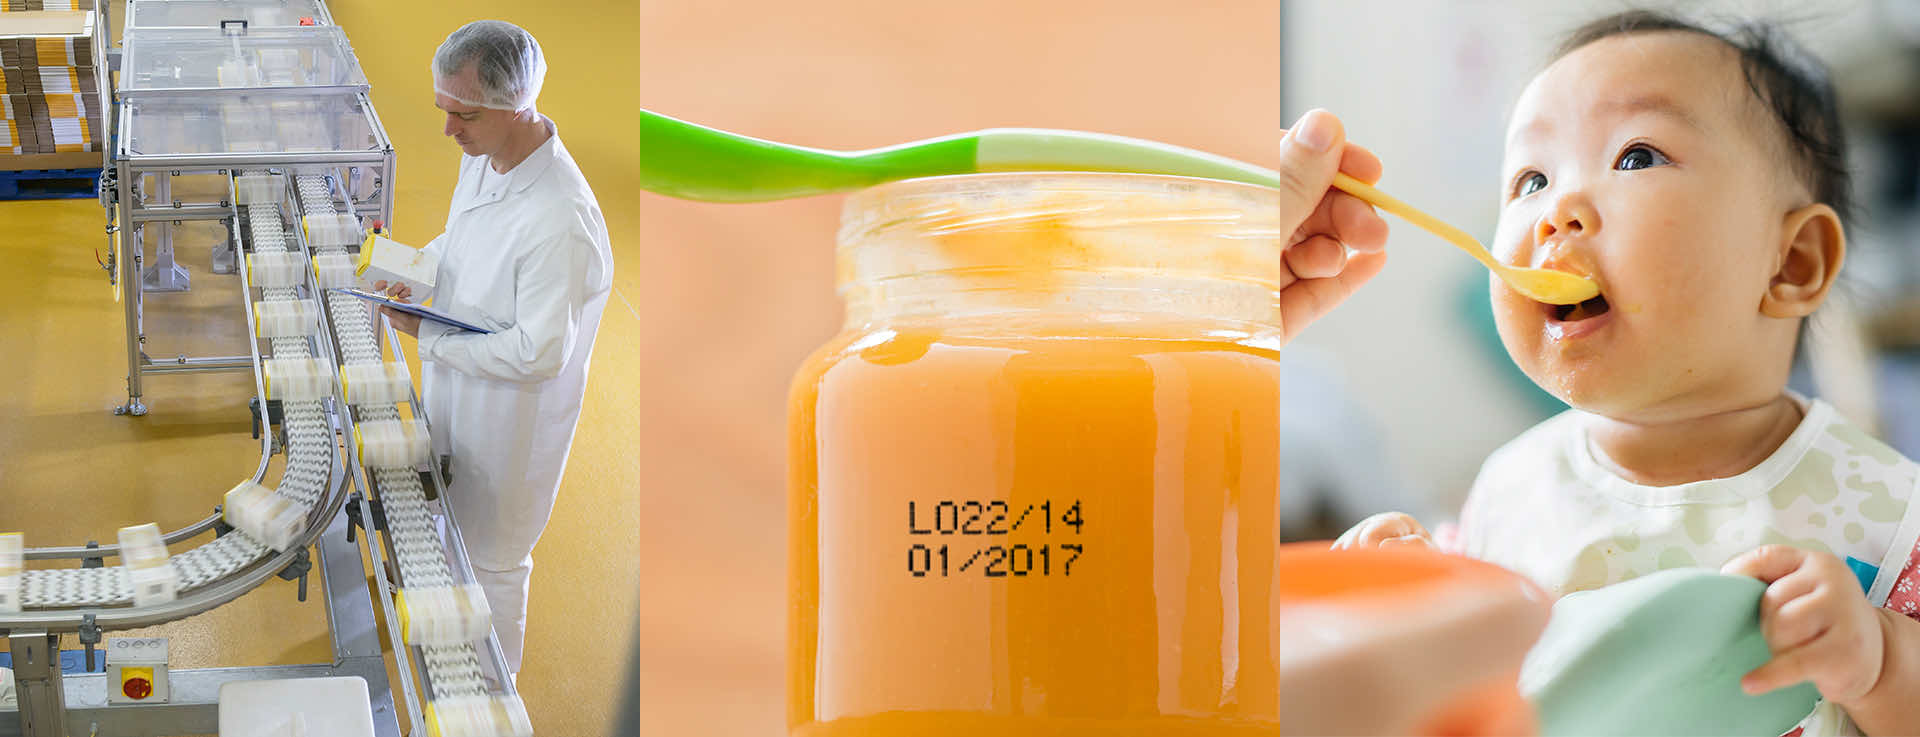 Triptych overhead view of a manufacturing line, close-up coding on baby food, baby eating food from a spoon